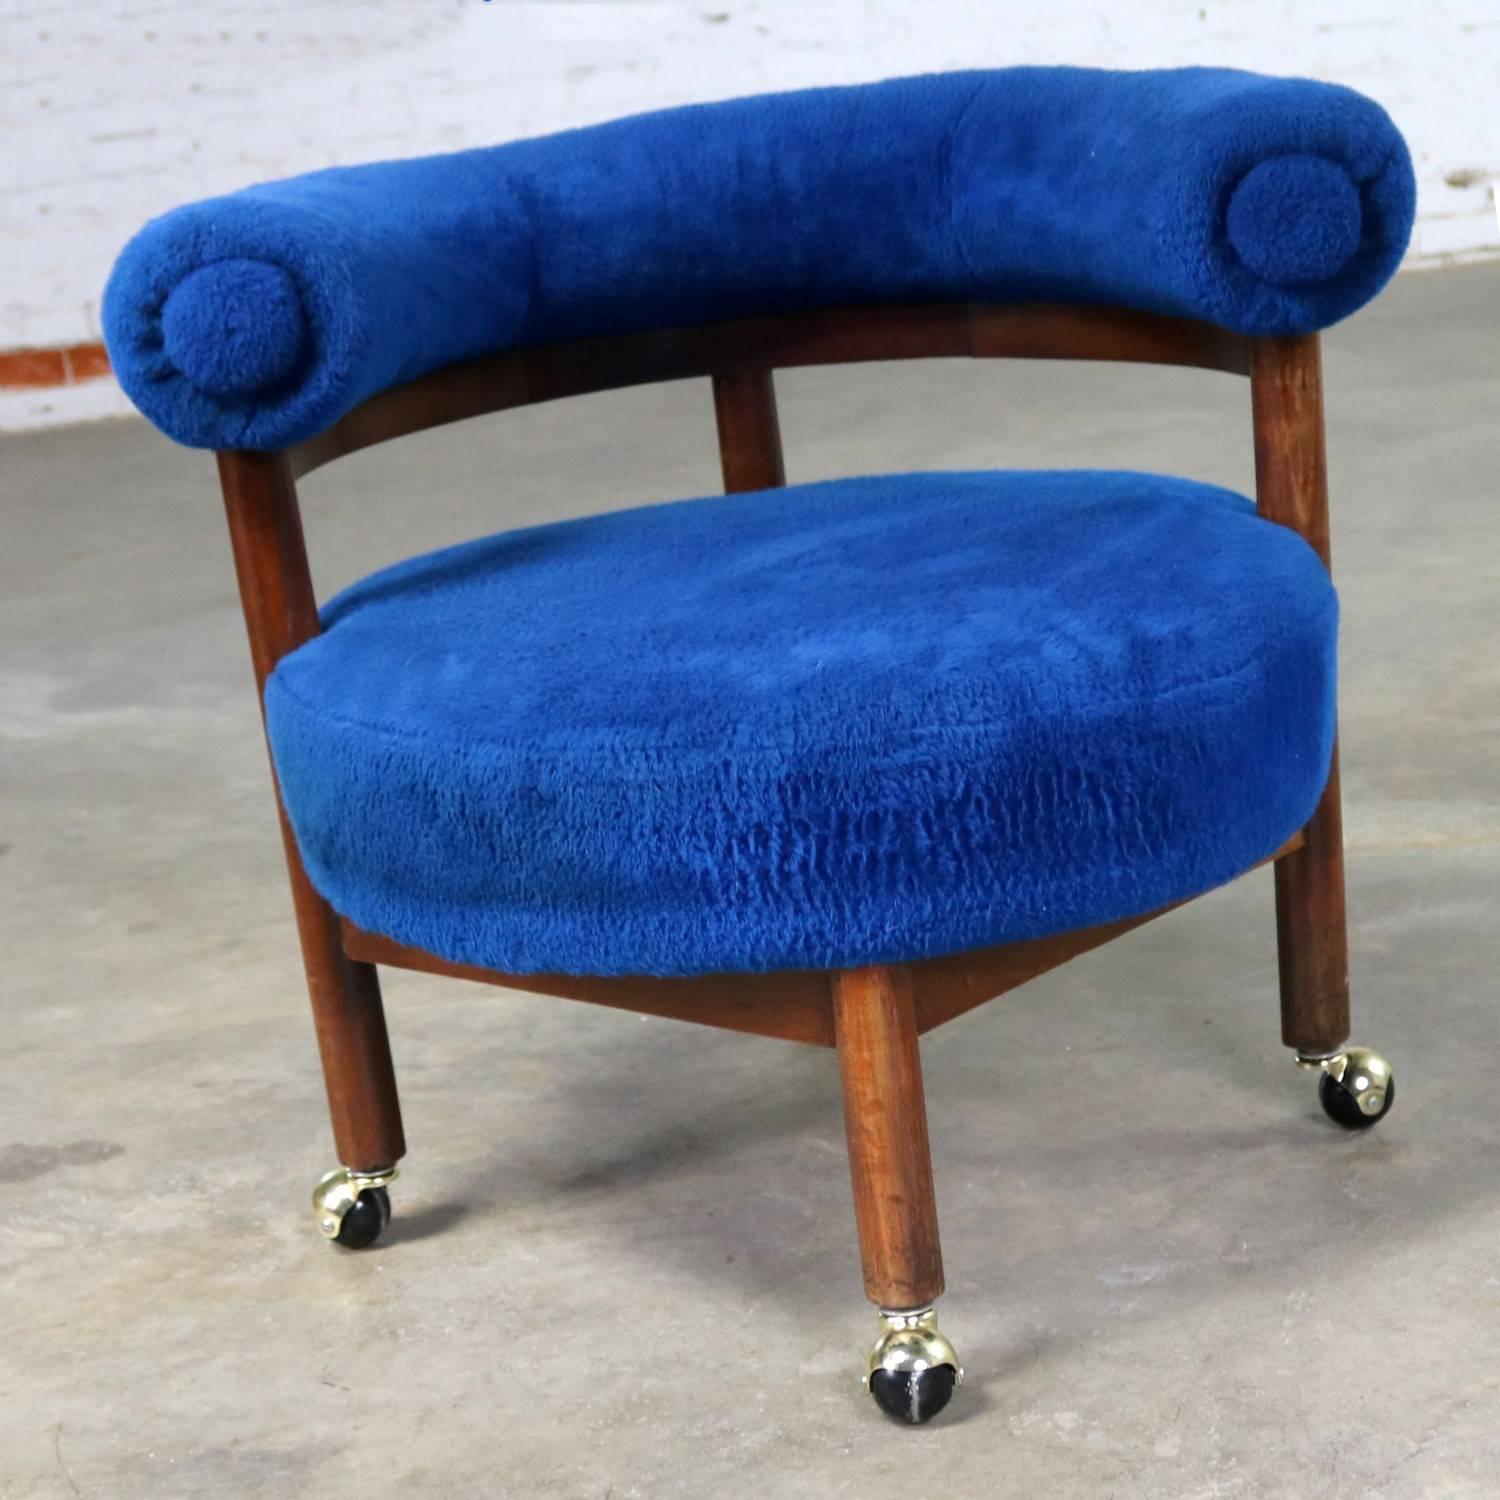 Fabulous Mid-Century Modern round upholstered corner lounge chair in royal blue fuzzy original upholstery with a bolster back on cylindrical wood legs with casters. This chair is in wonderful vintage condition apart from a cigarette burn on the seat